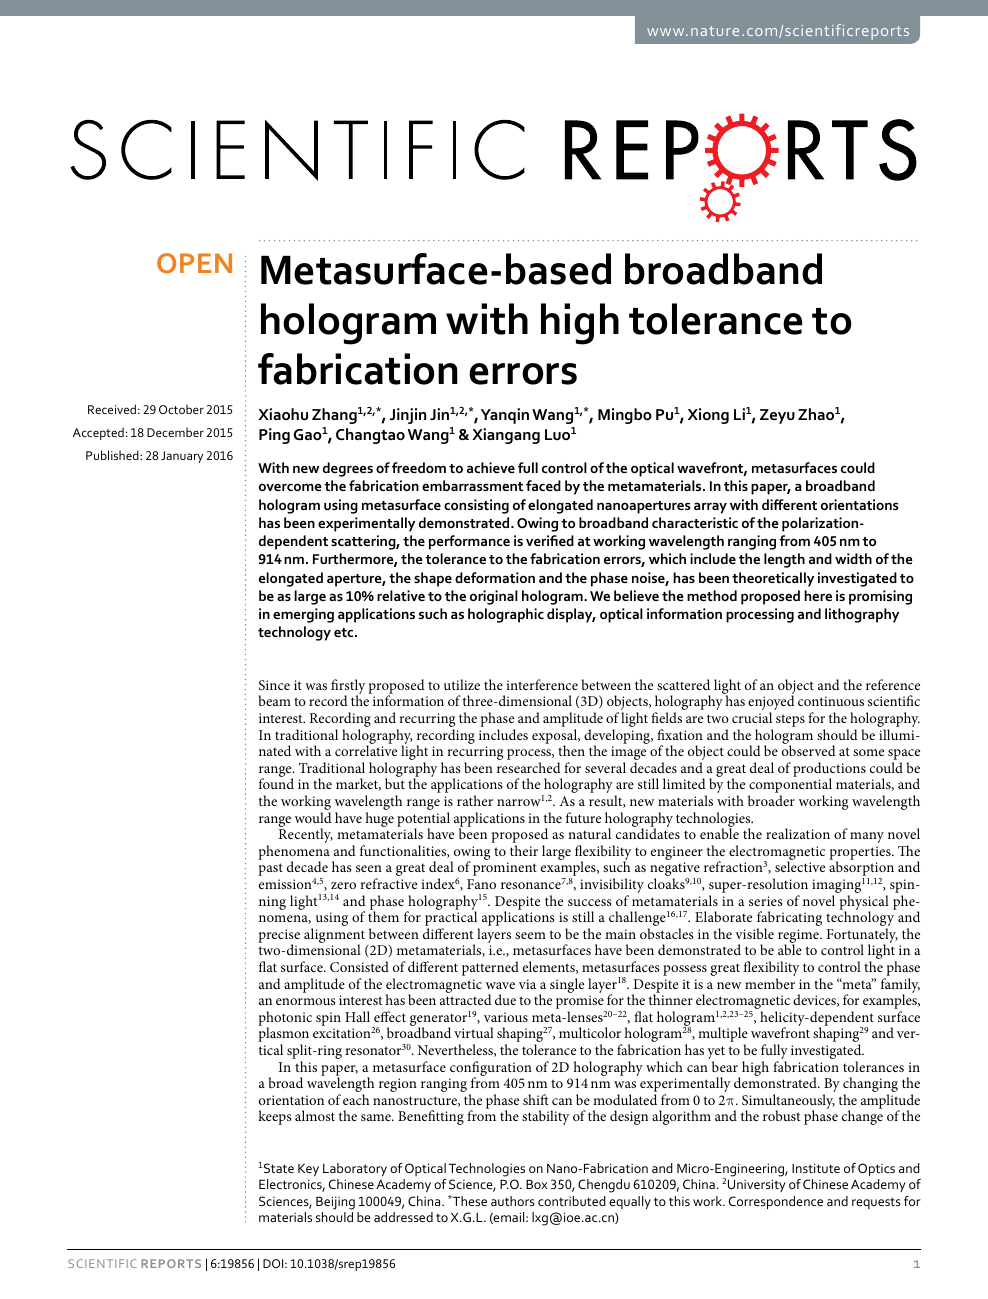 Metasurface Based Broadband Hologram With High Tolerance To Fabrication Errors Topic Of Research Paper In Nano Technology Download Scholarly Article Pdf And Read For Free On Cyberleninka Open Science Hub